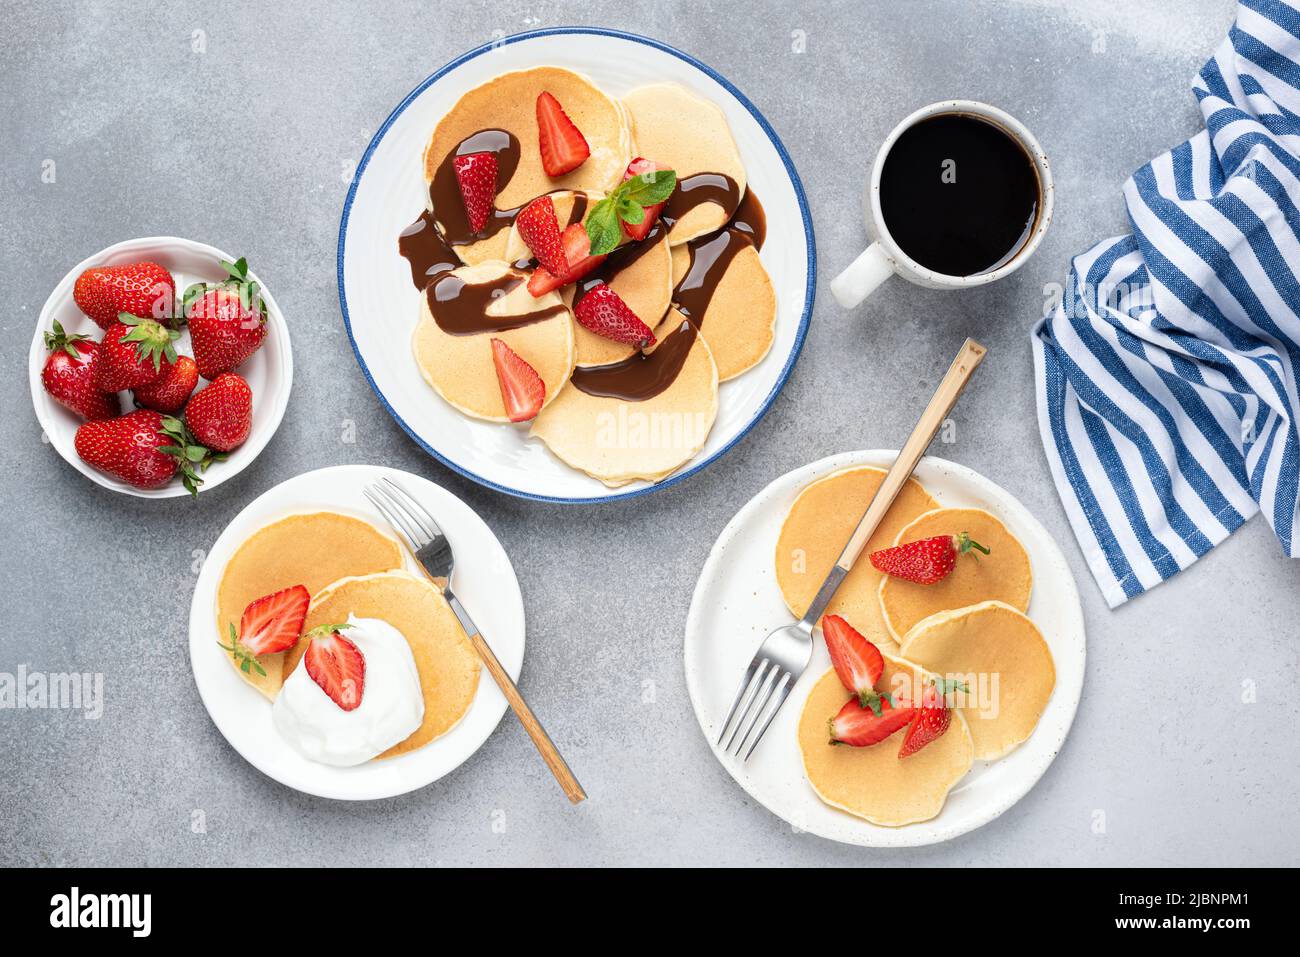 Pancakes served with fresh strawberries, chocolate syrup and yogurt, concrete table background. Top view. Family breakfast concept Stock Photo